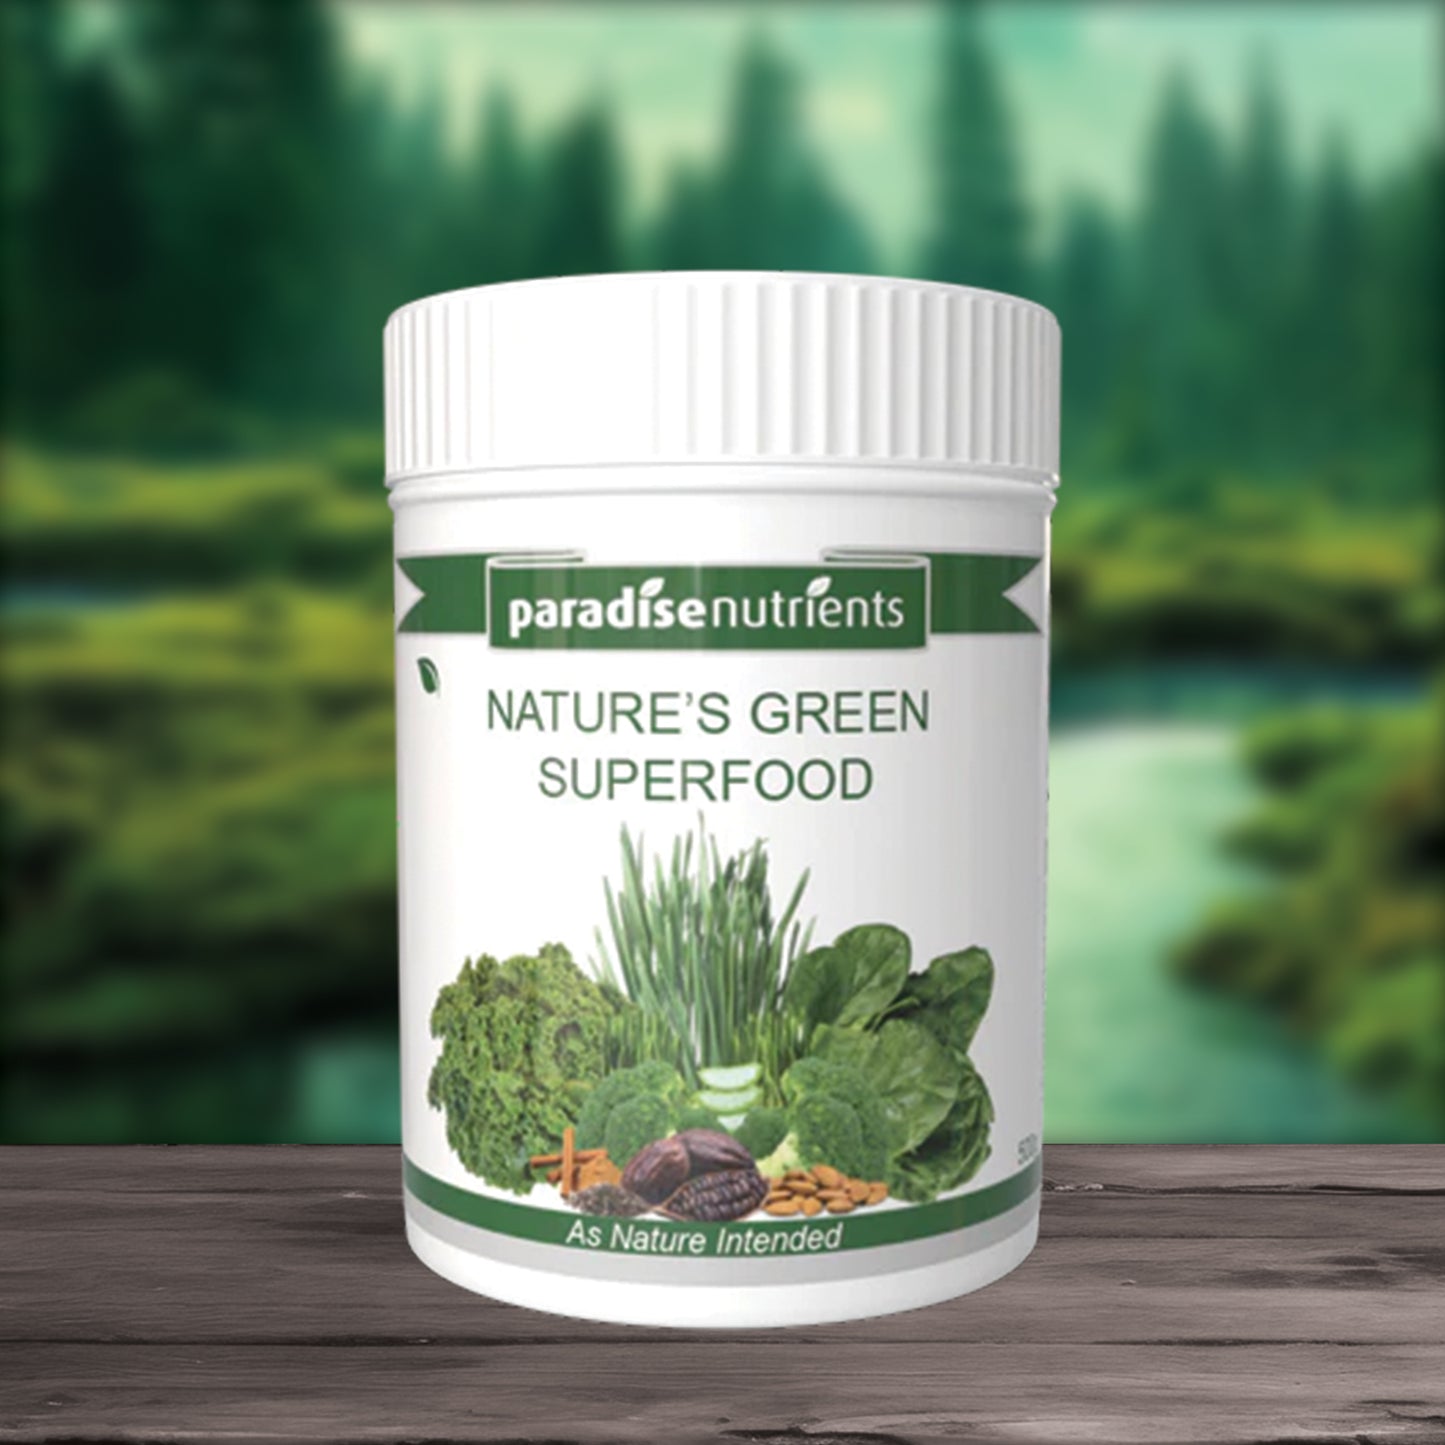 Nature's Green Superfood - Paradise Nutrients - More Than Charms